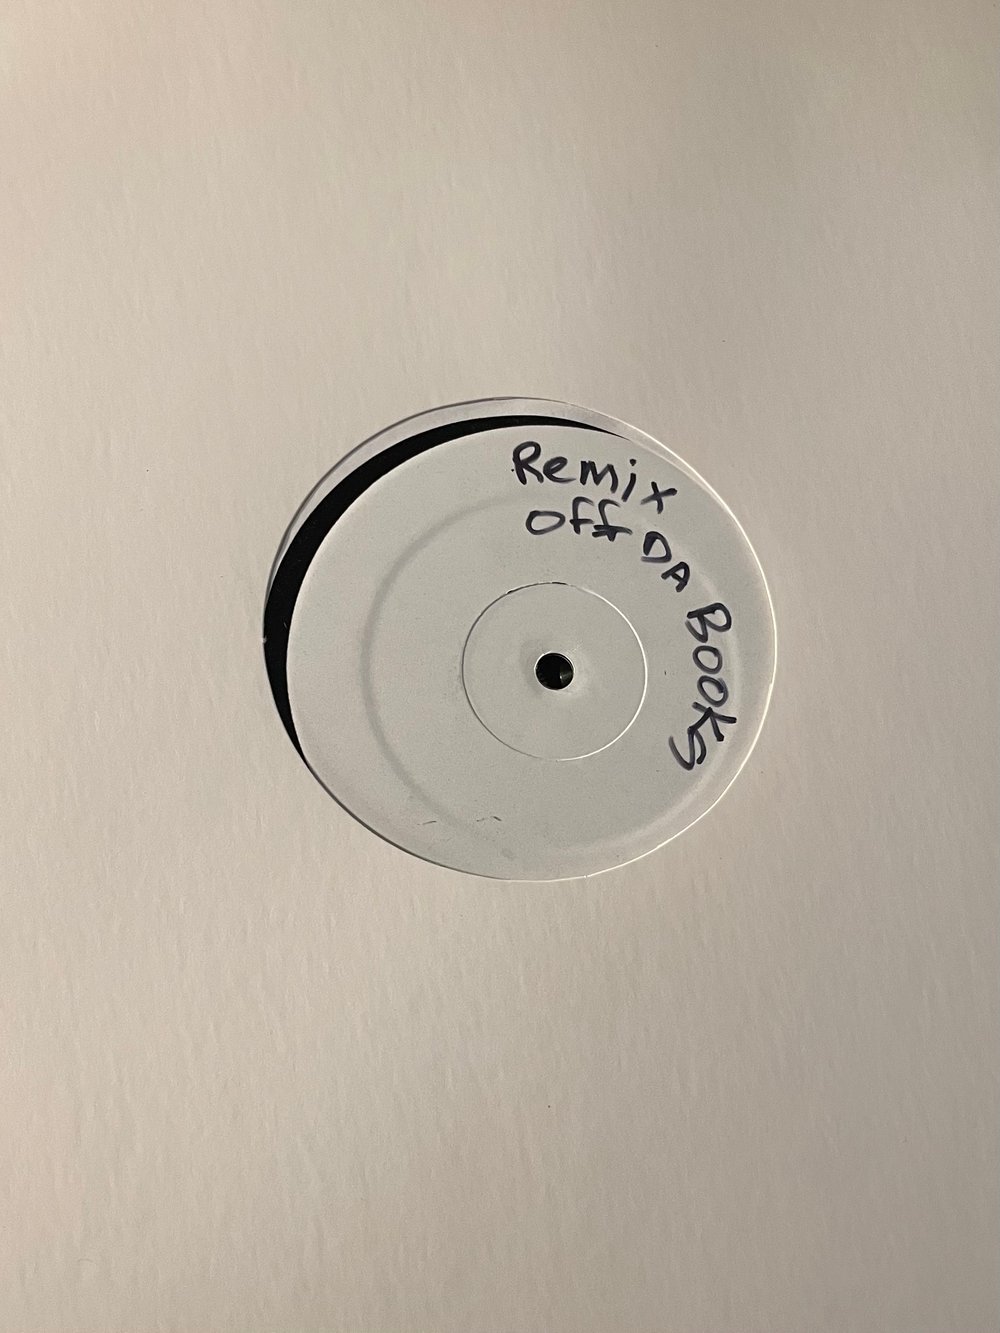 Image of OFF THE BOOKS WHITE LABEL TEST PRESS 